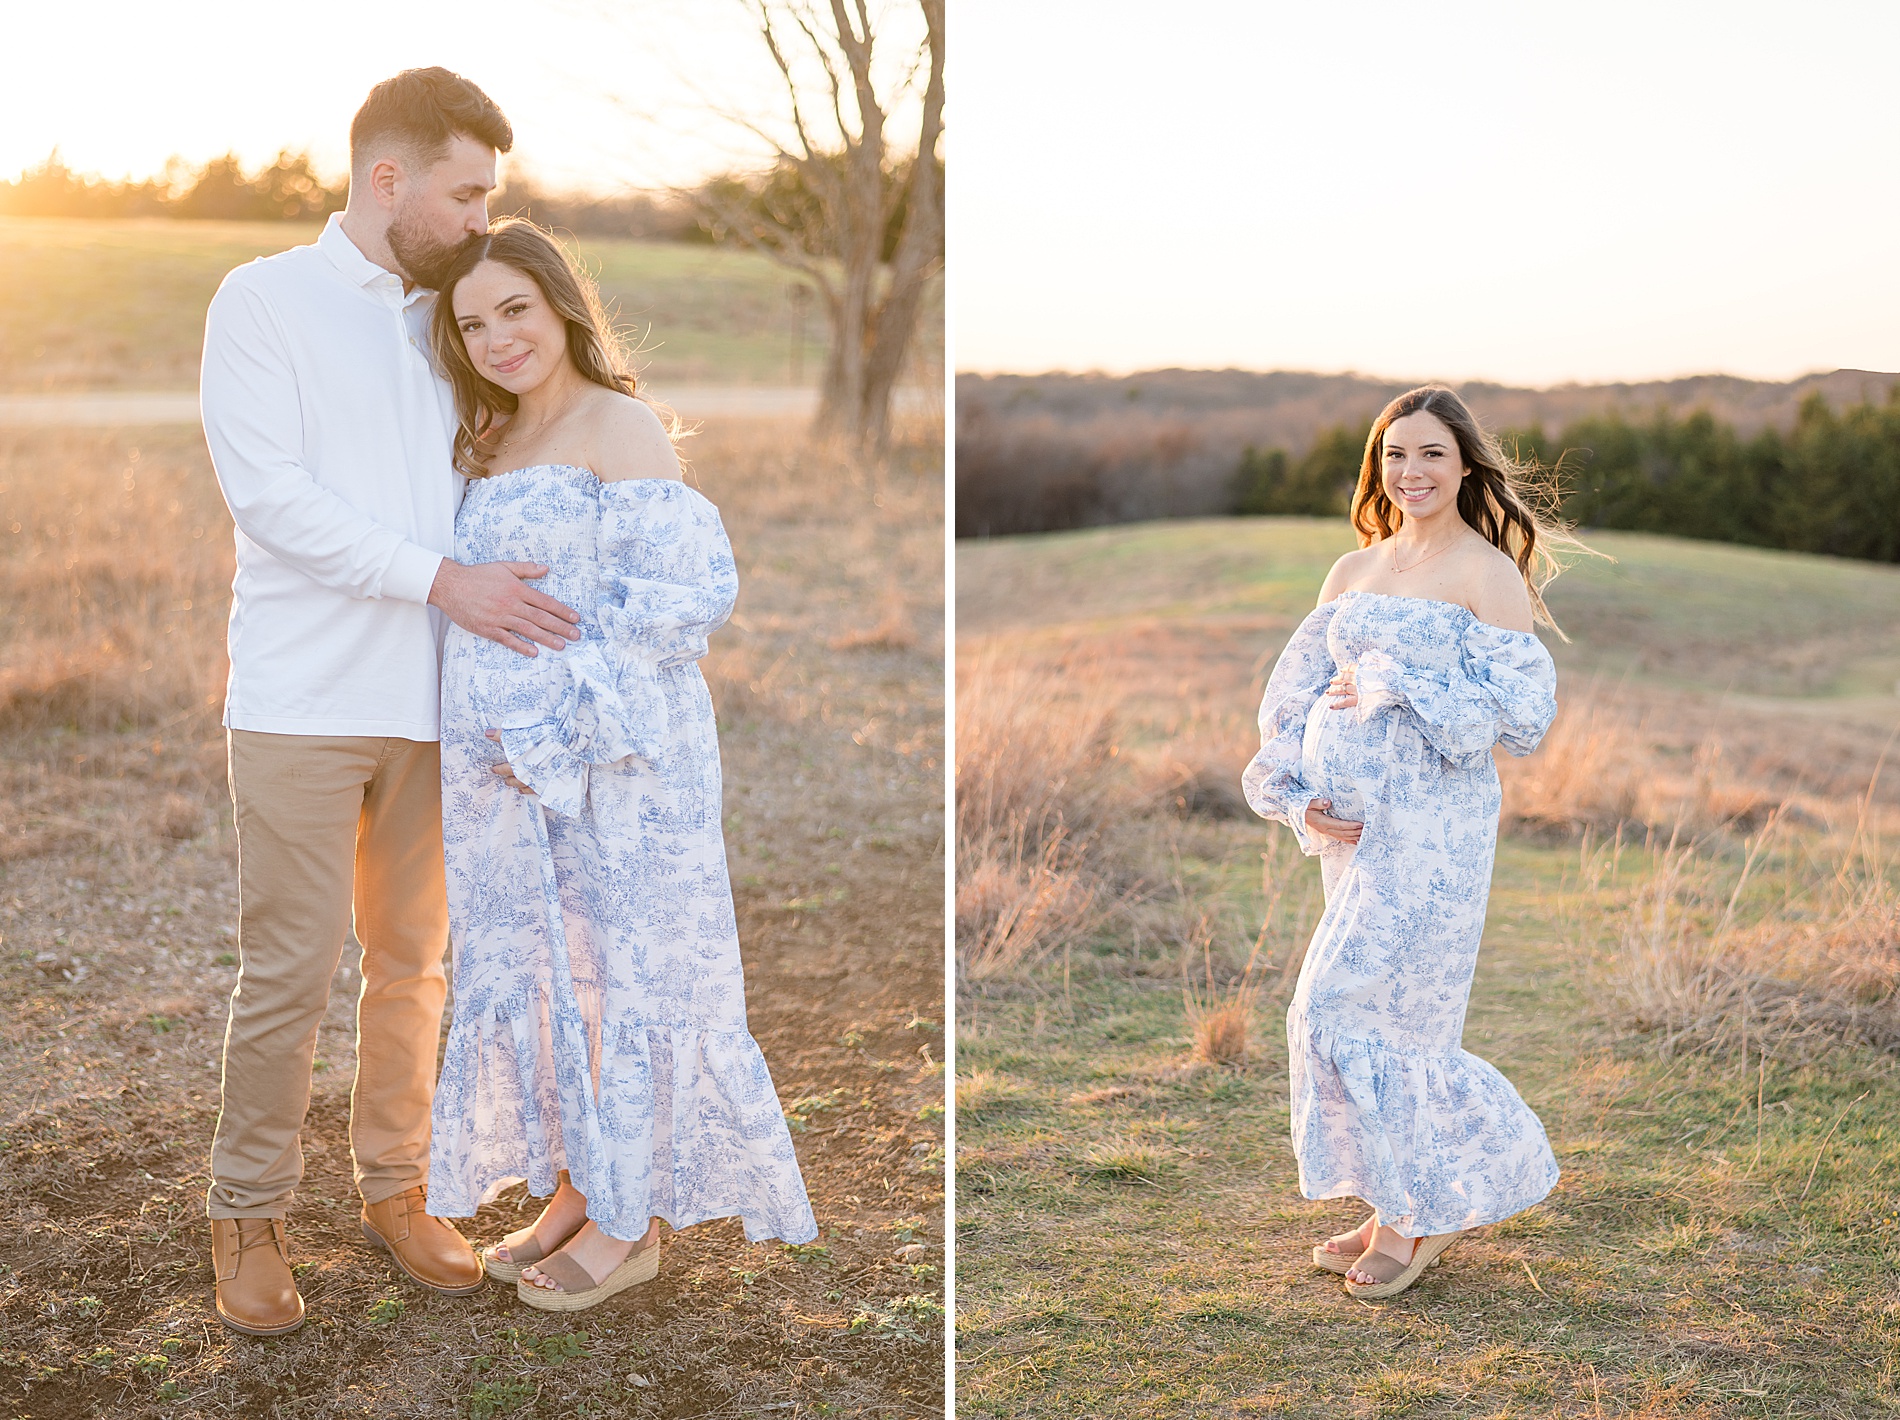 sunset maternity portraits taken by Lindsey Dutton Photography, a Dallas maternity photographer
